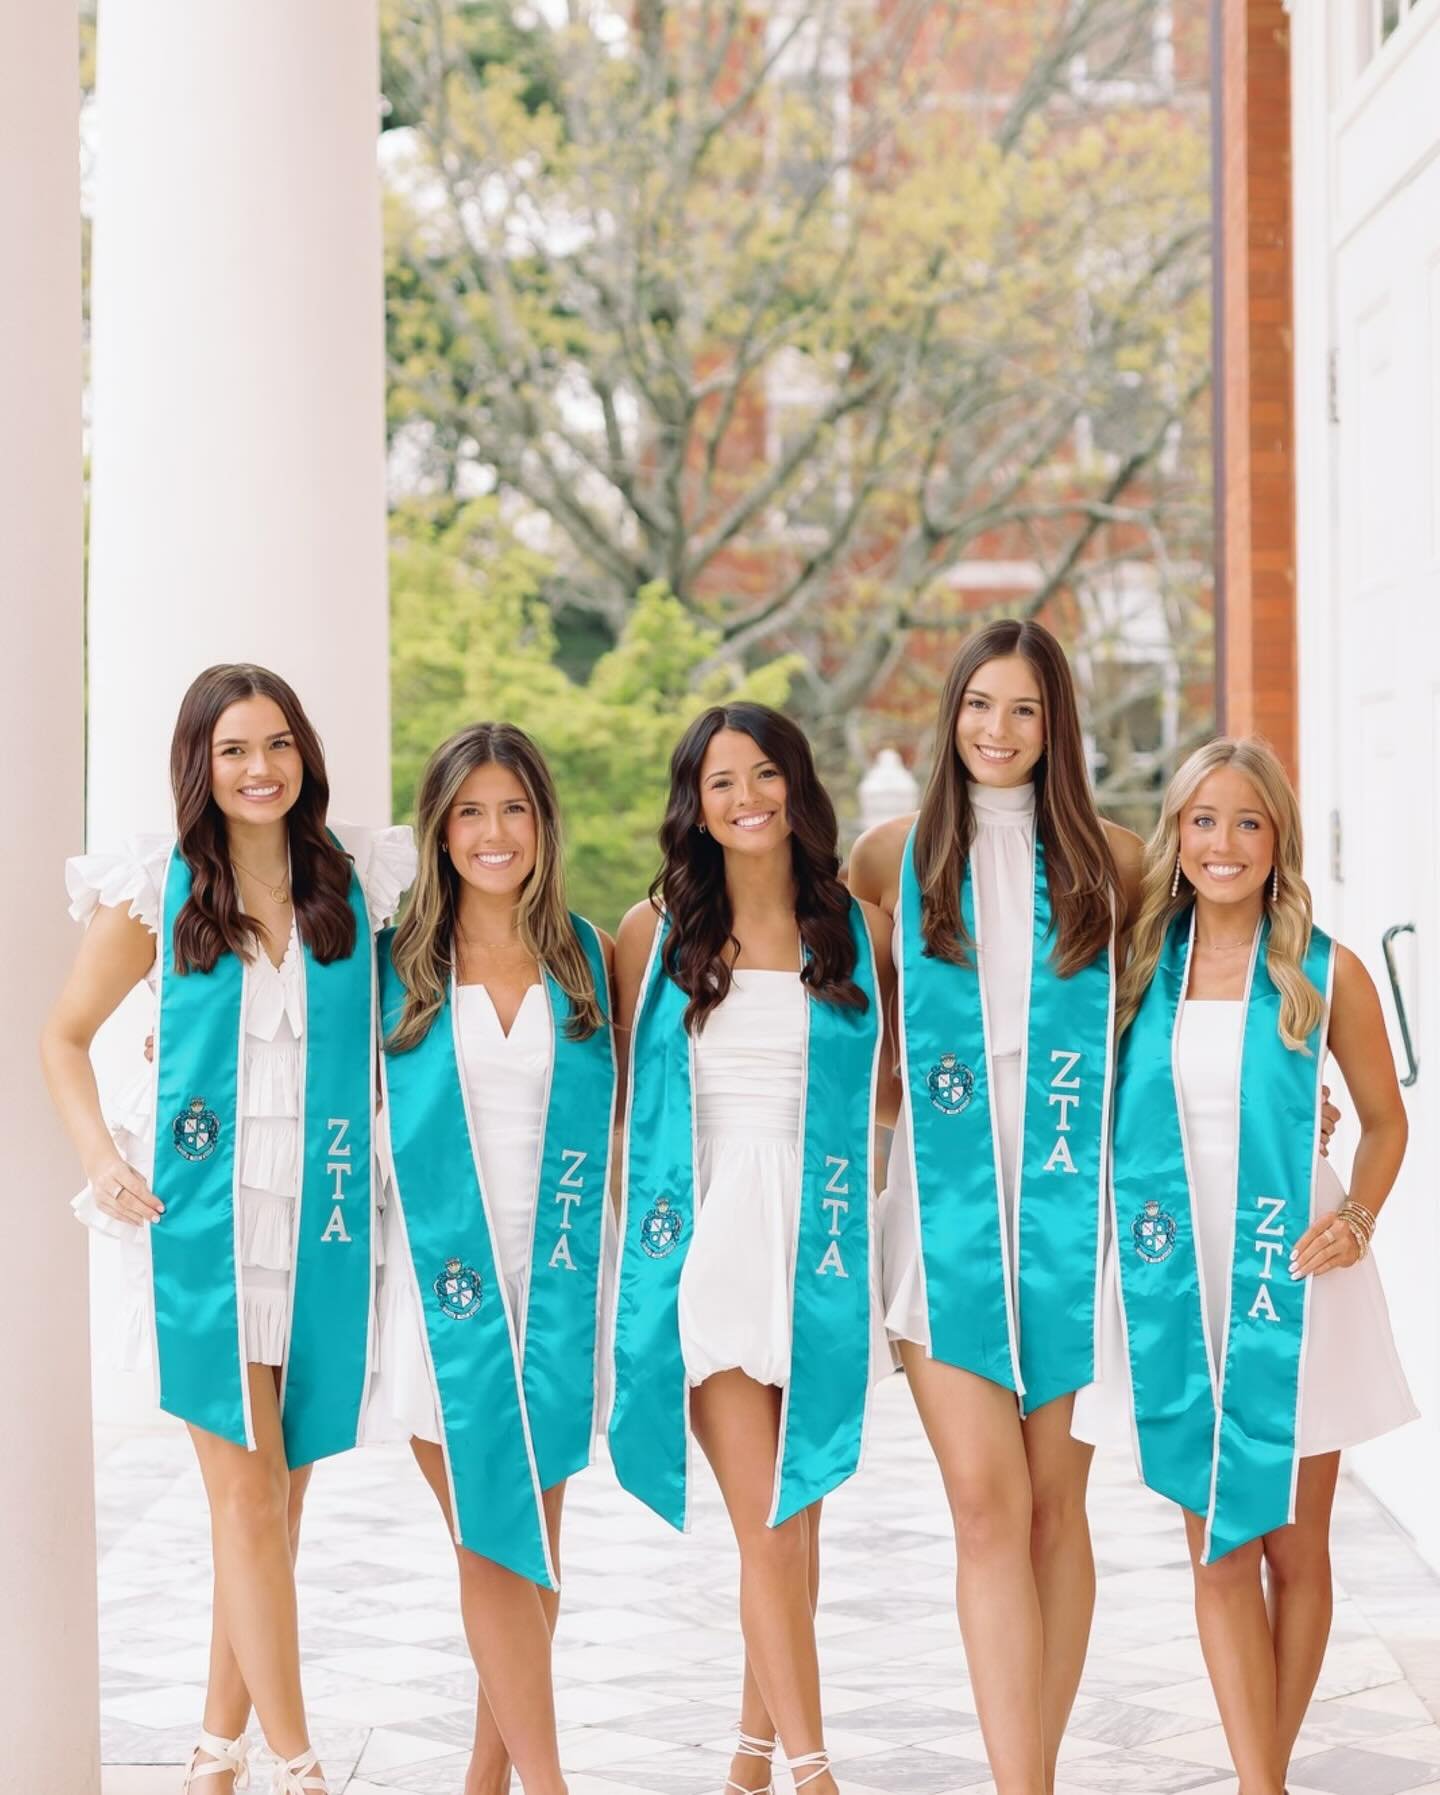 Here&rsquo;s to our #SENIORS &amp; a sisterhood that lasts a lifetime!!! We are so proud of each and every one of you! 🎓🤍✨

#ztaalum #sisterhood